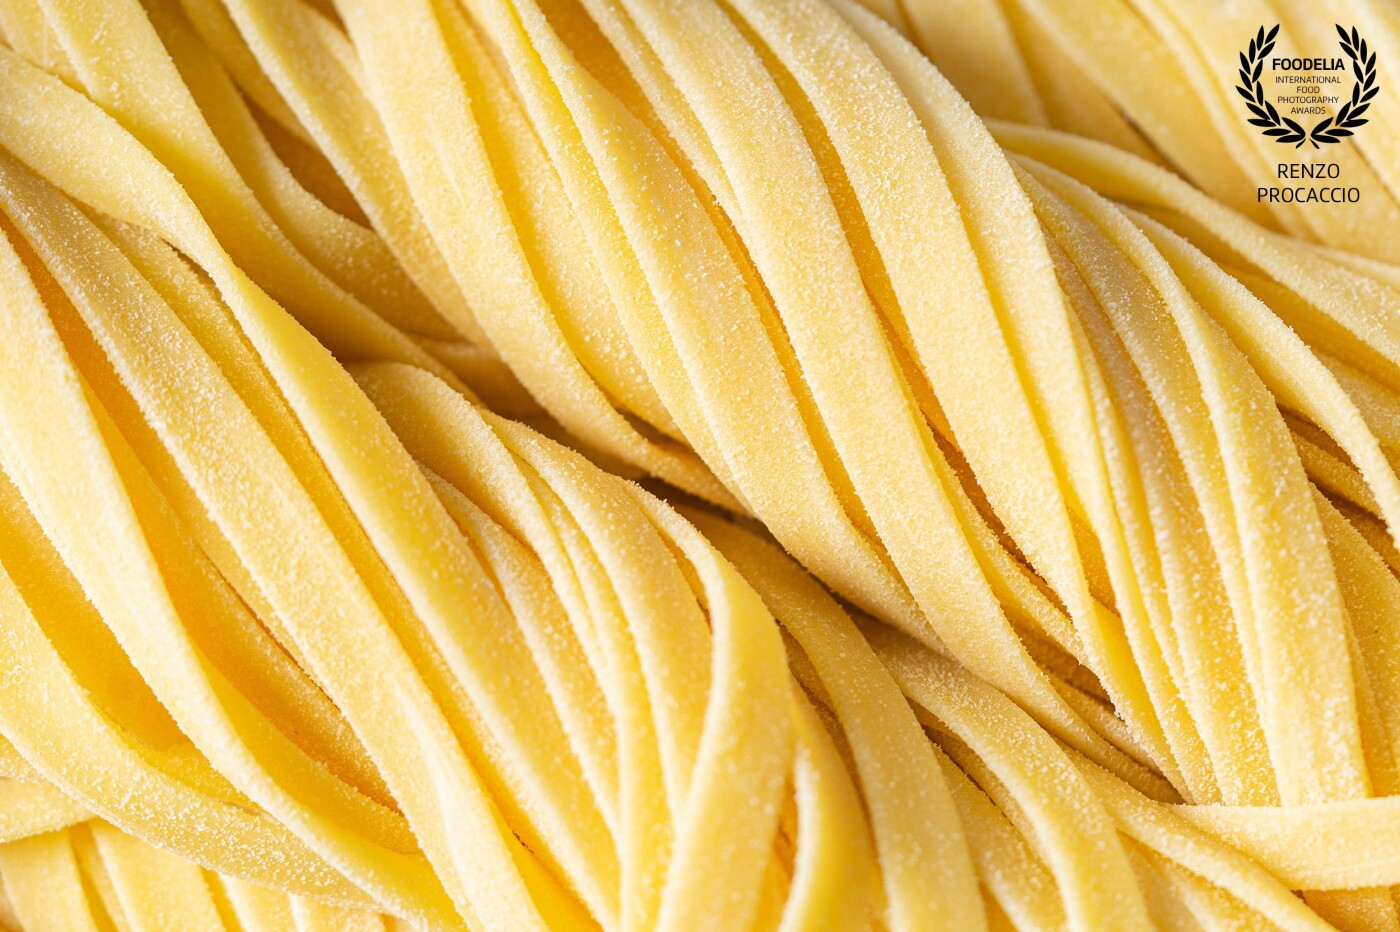 Make this shot was a lot of fun, I was photographing dishes and pasta all day in a pasta factory, almost at the end they decided to take some photos of raw products and as soon as I saw these linguine, I told myself that I had to take a macro shot of them.